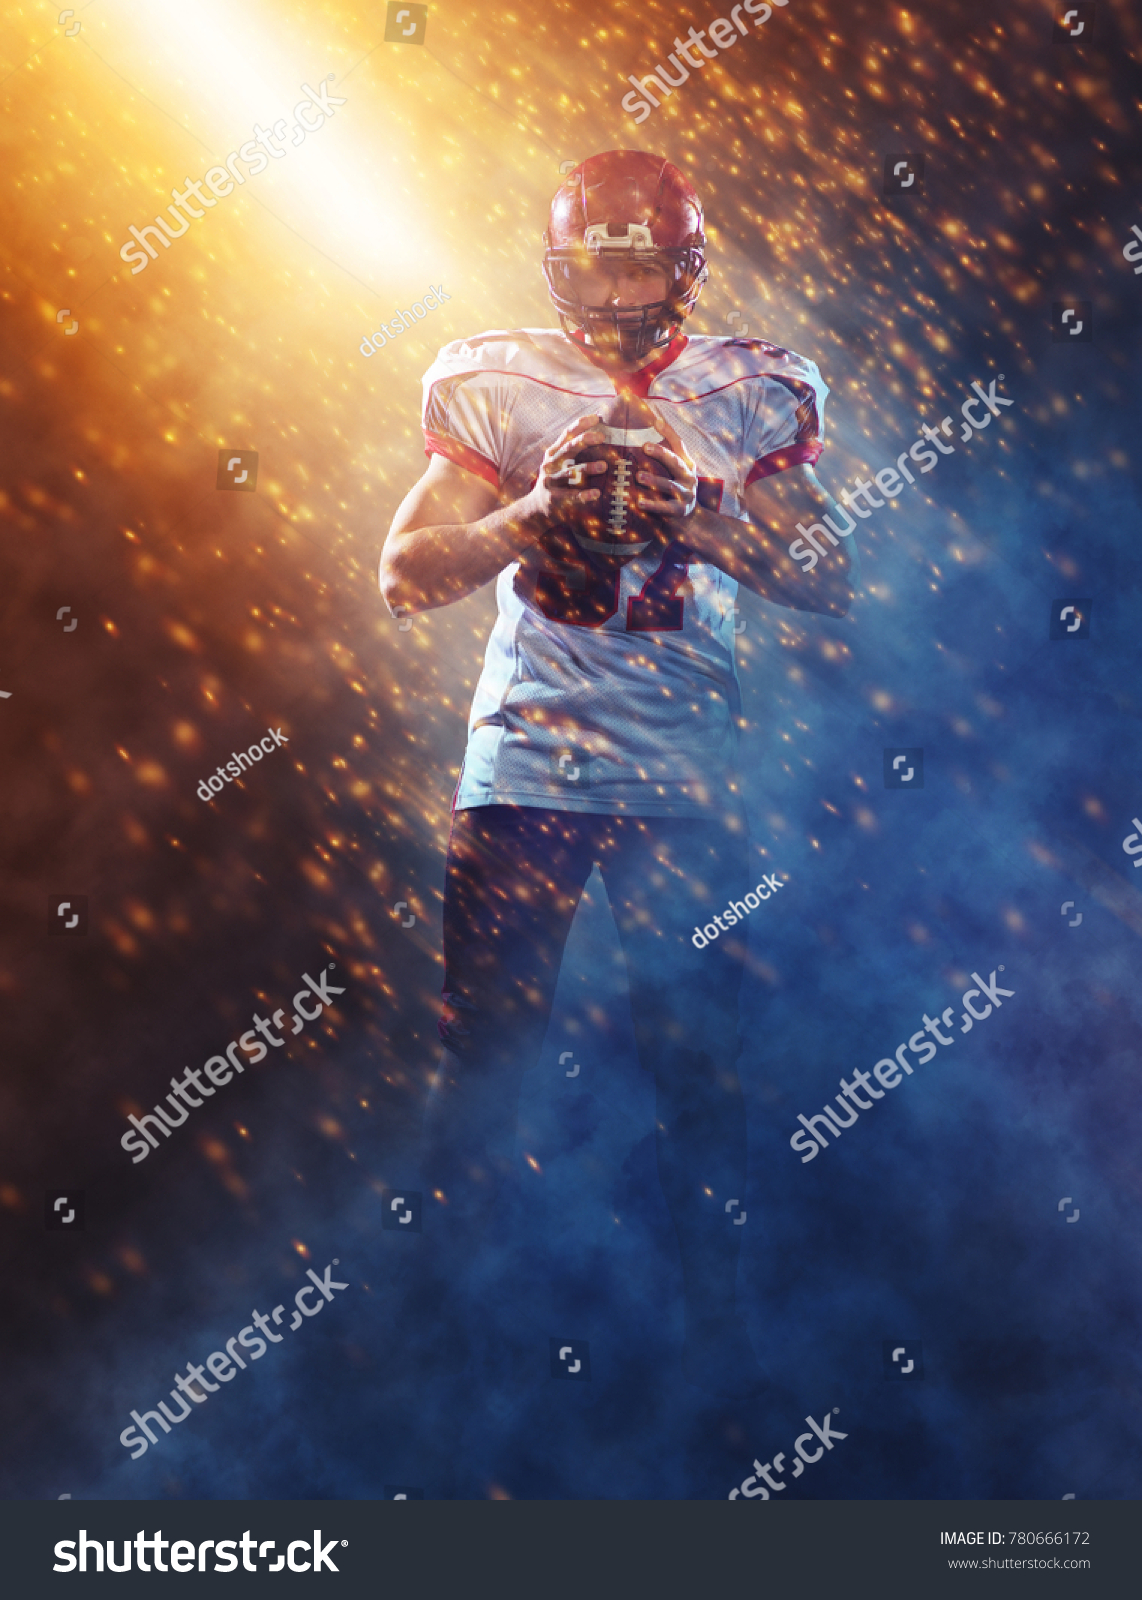 portrait of confident American football player holding ball while standing on the big field with particles effects and lights #780666172